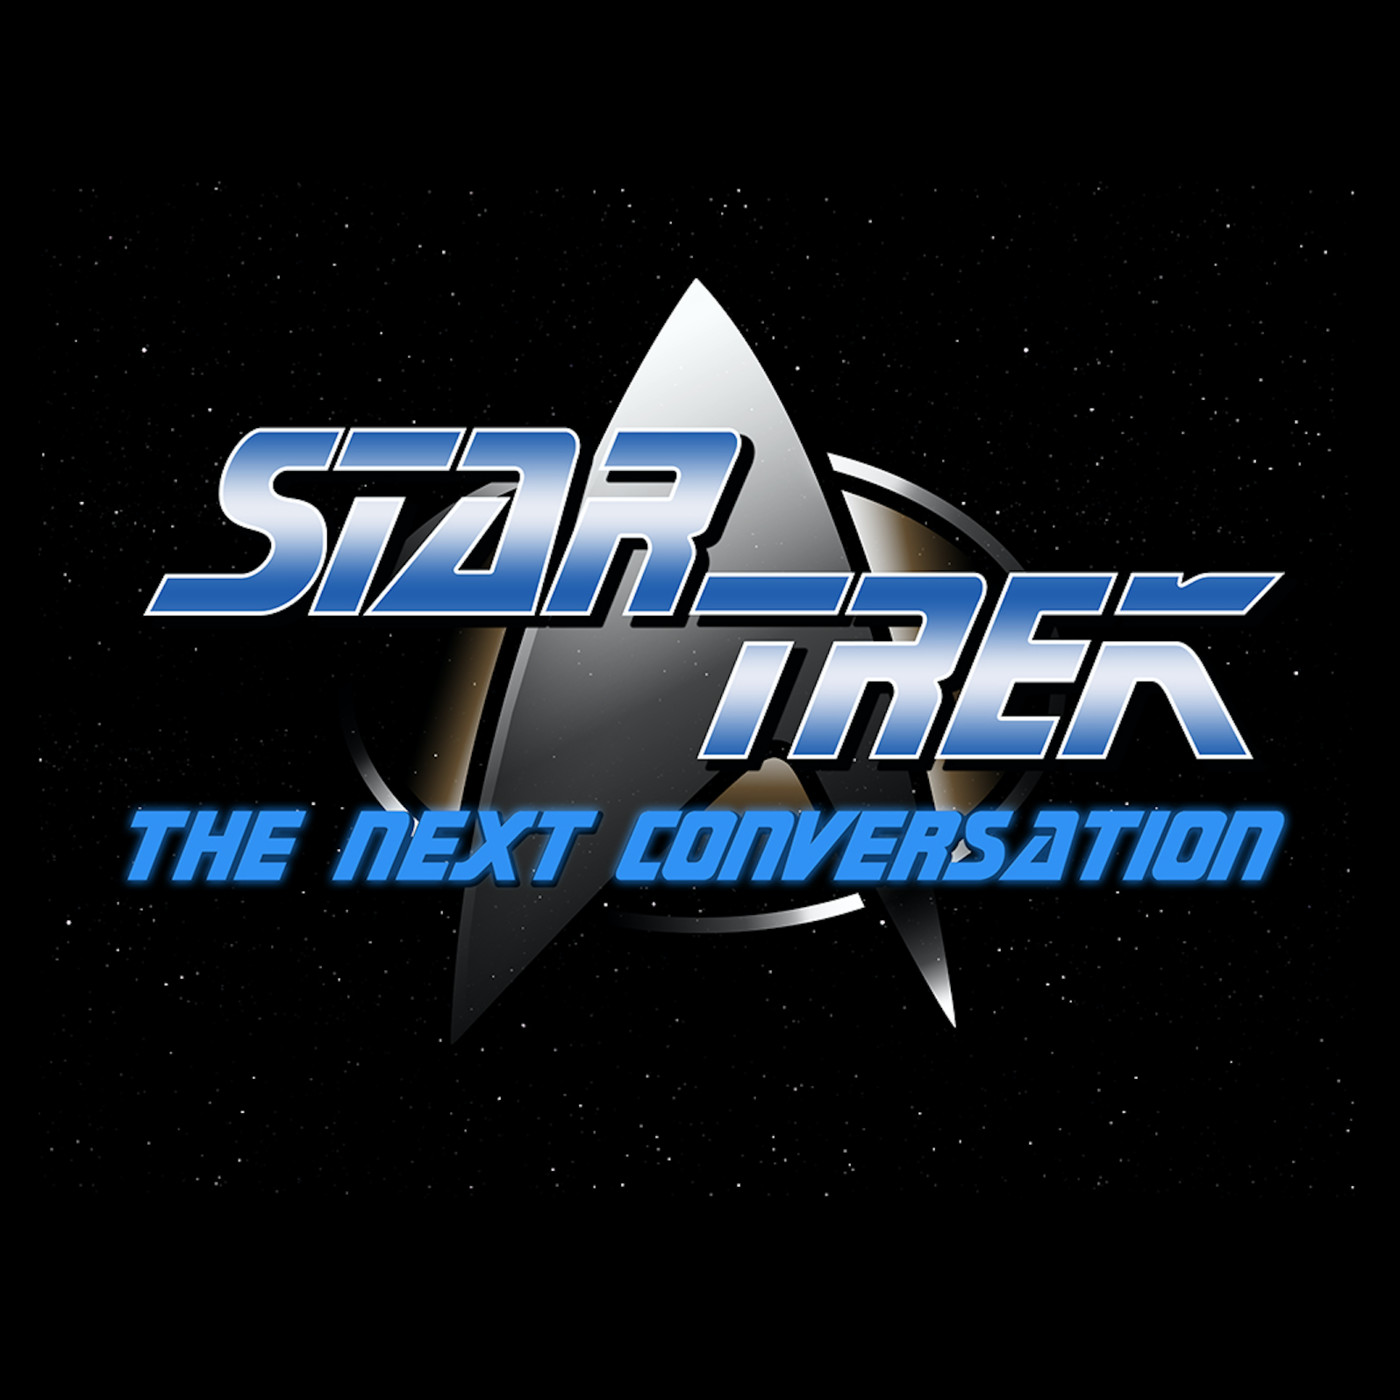 DS9 s2e23 “Crossover” - a semi funny Star Trek podcast currently about TV's Deep Space Nine